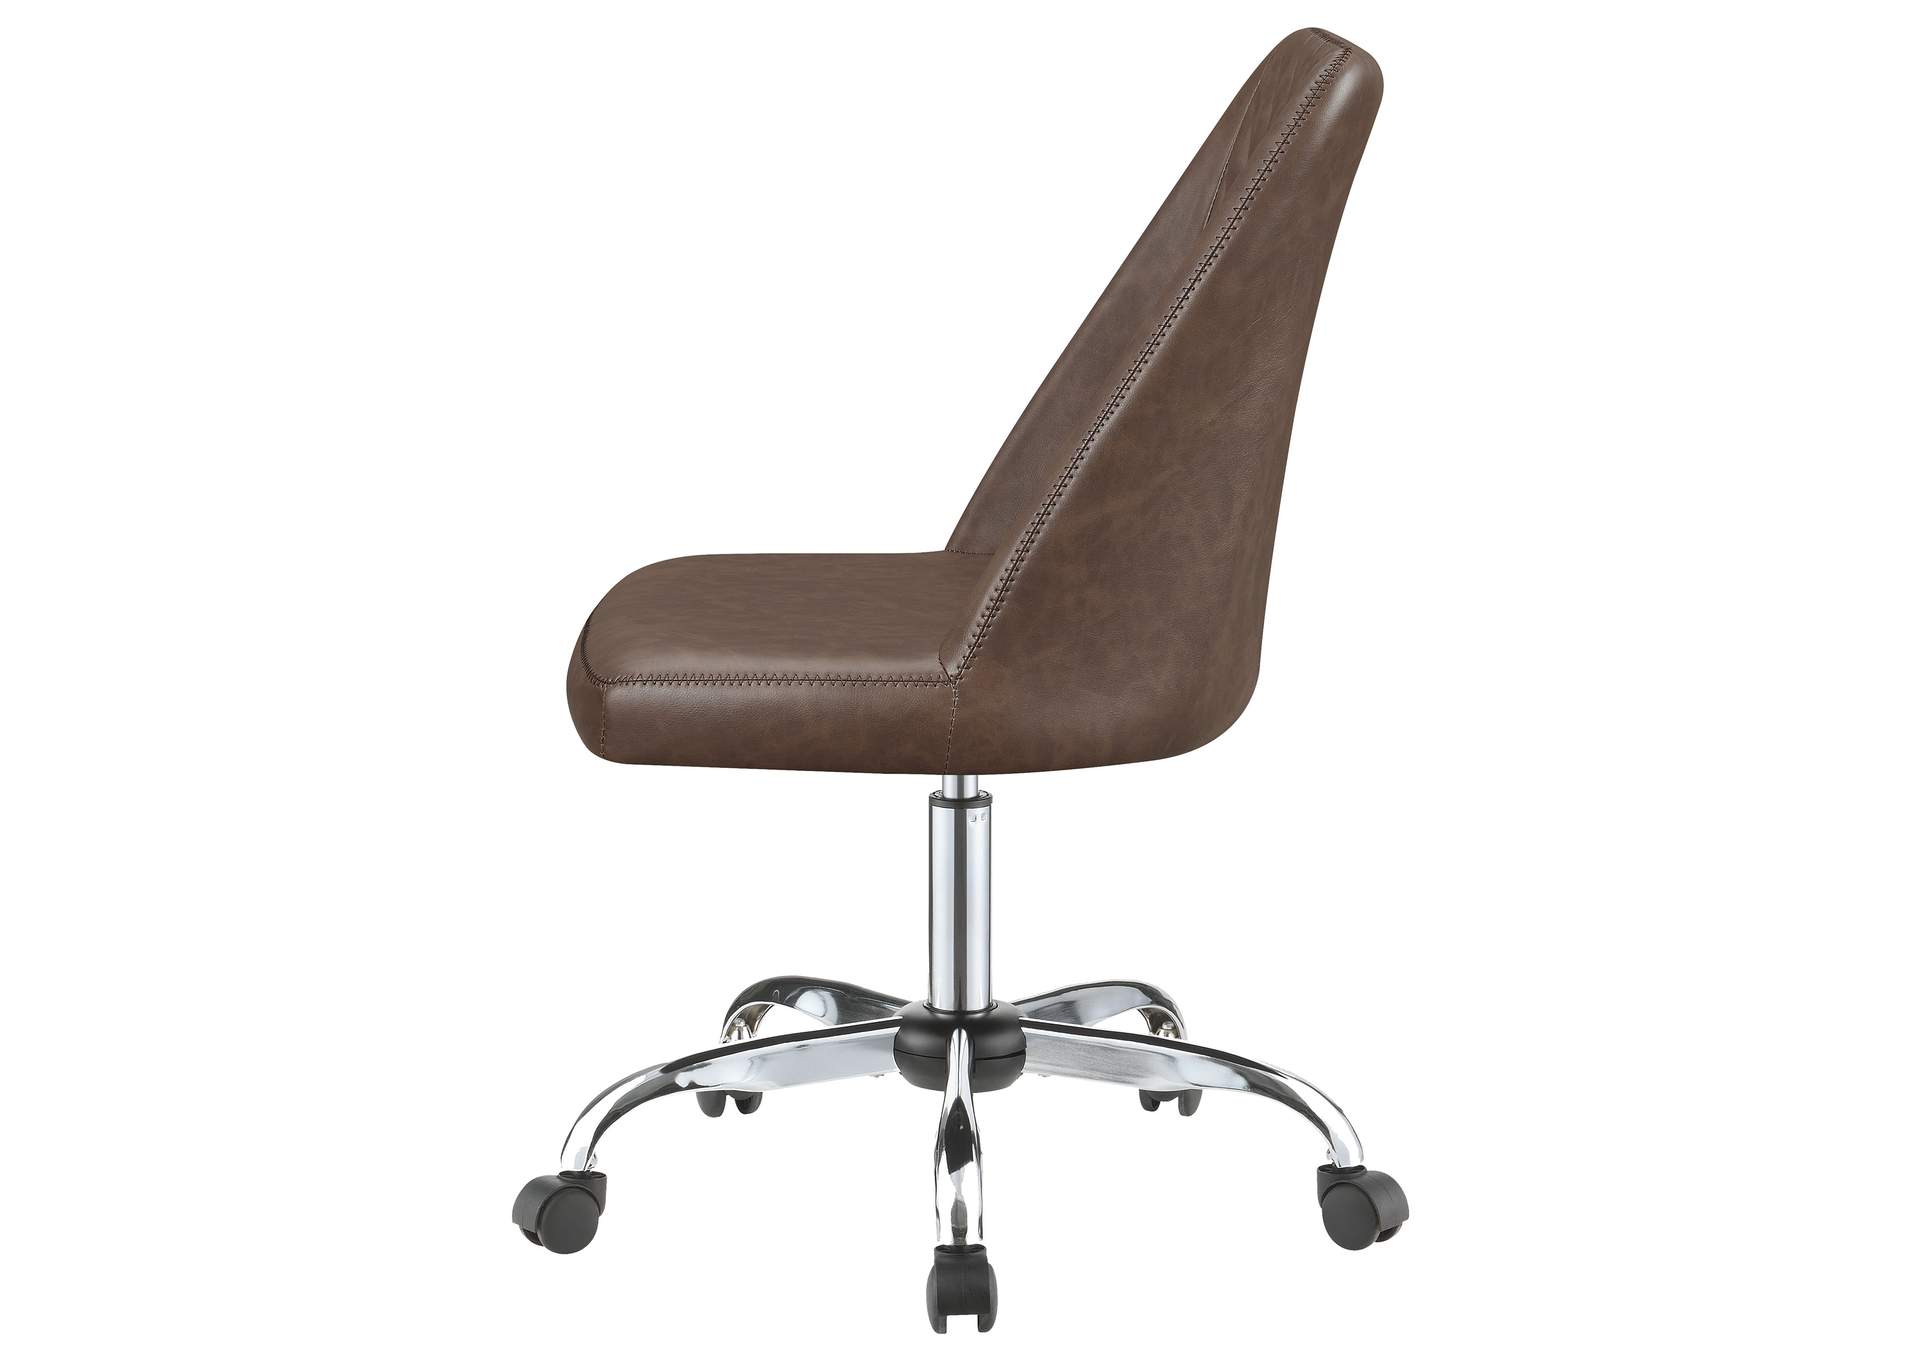 Althea Upholstered Tufted Back Office Chair Brown and Chrome,Coaster Furniture